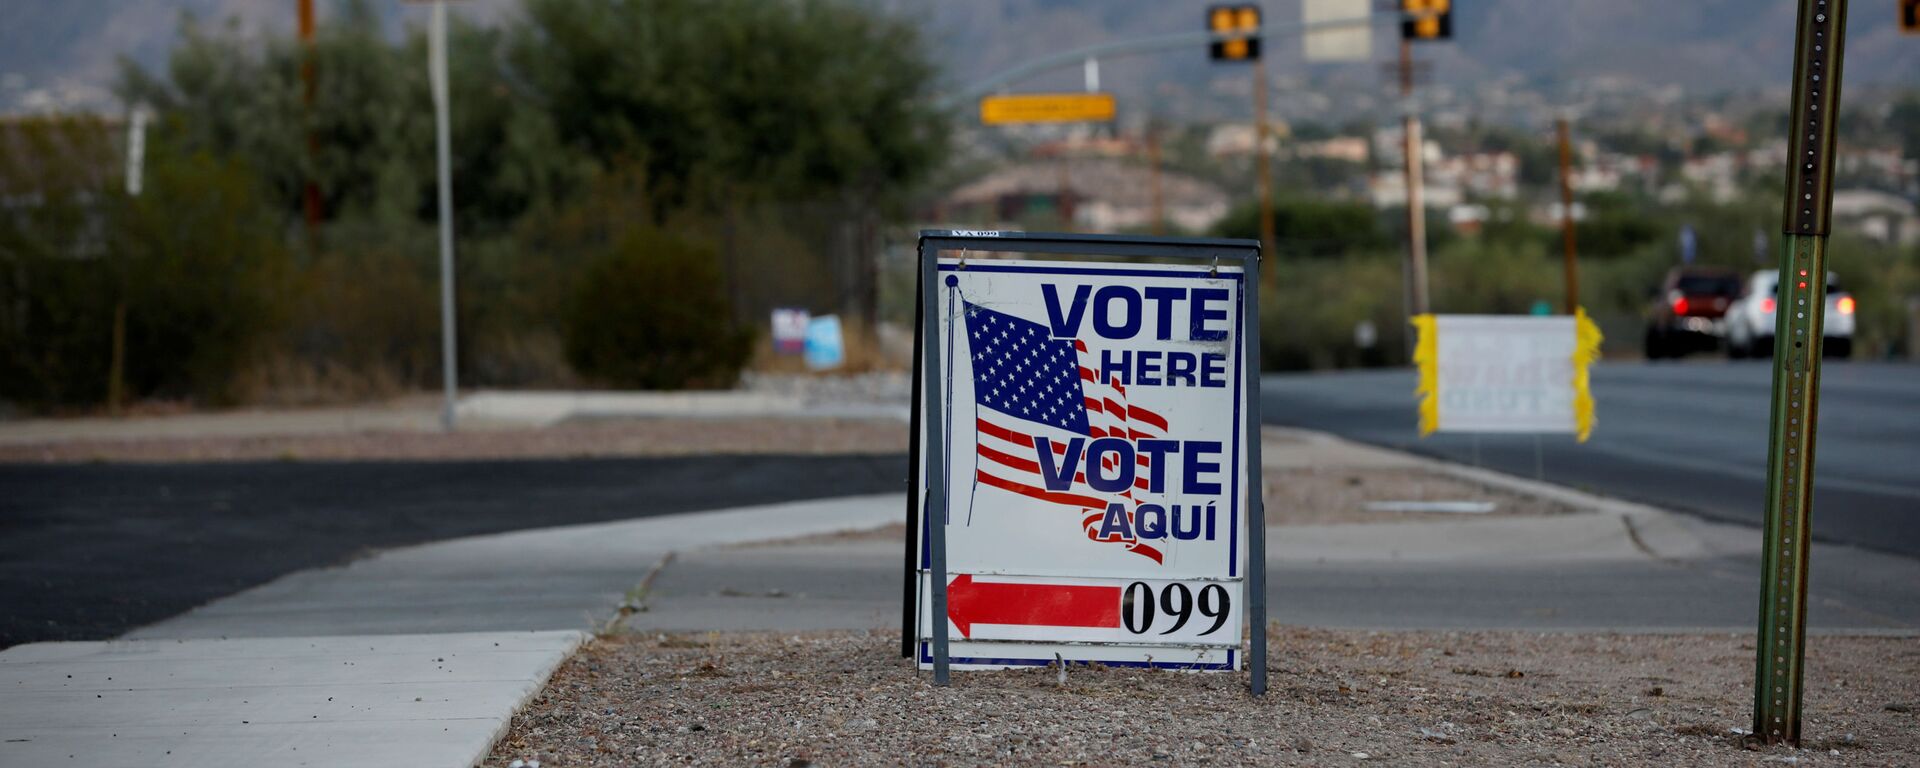 Sign directs voters to a polling station on Election Day in Tucson, Arizona, U.S. November 3, 2020 - Sputnik International, 1920, 24.09.2021